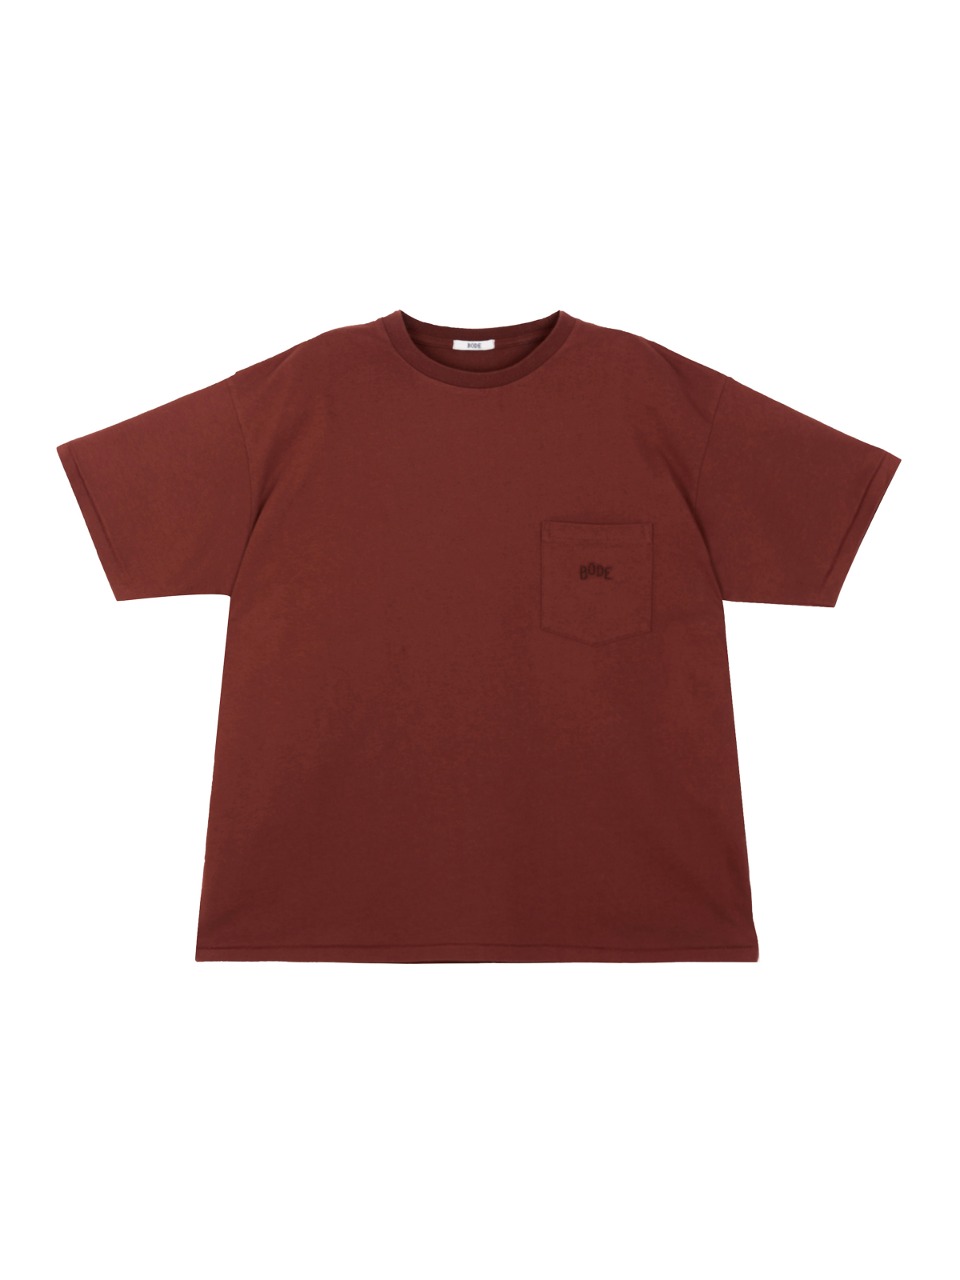 BODE - EMBROIDERED T-SHIRT (BROWN)